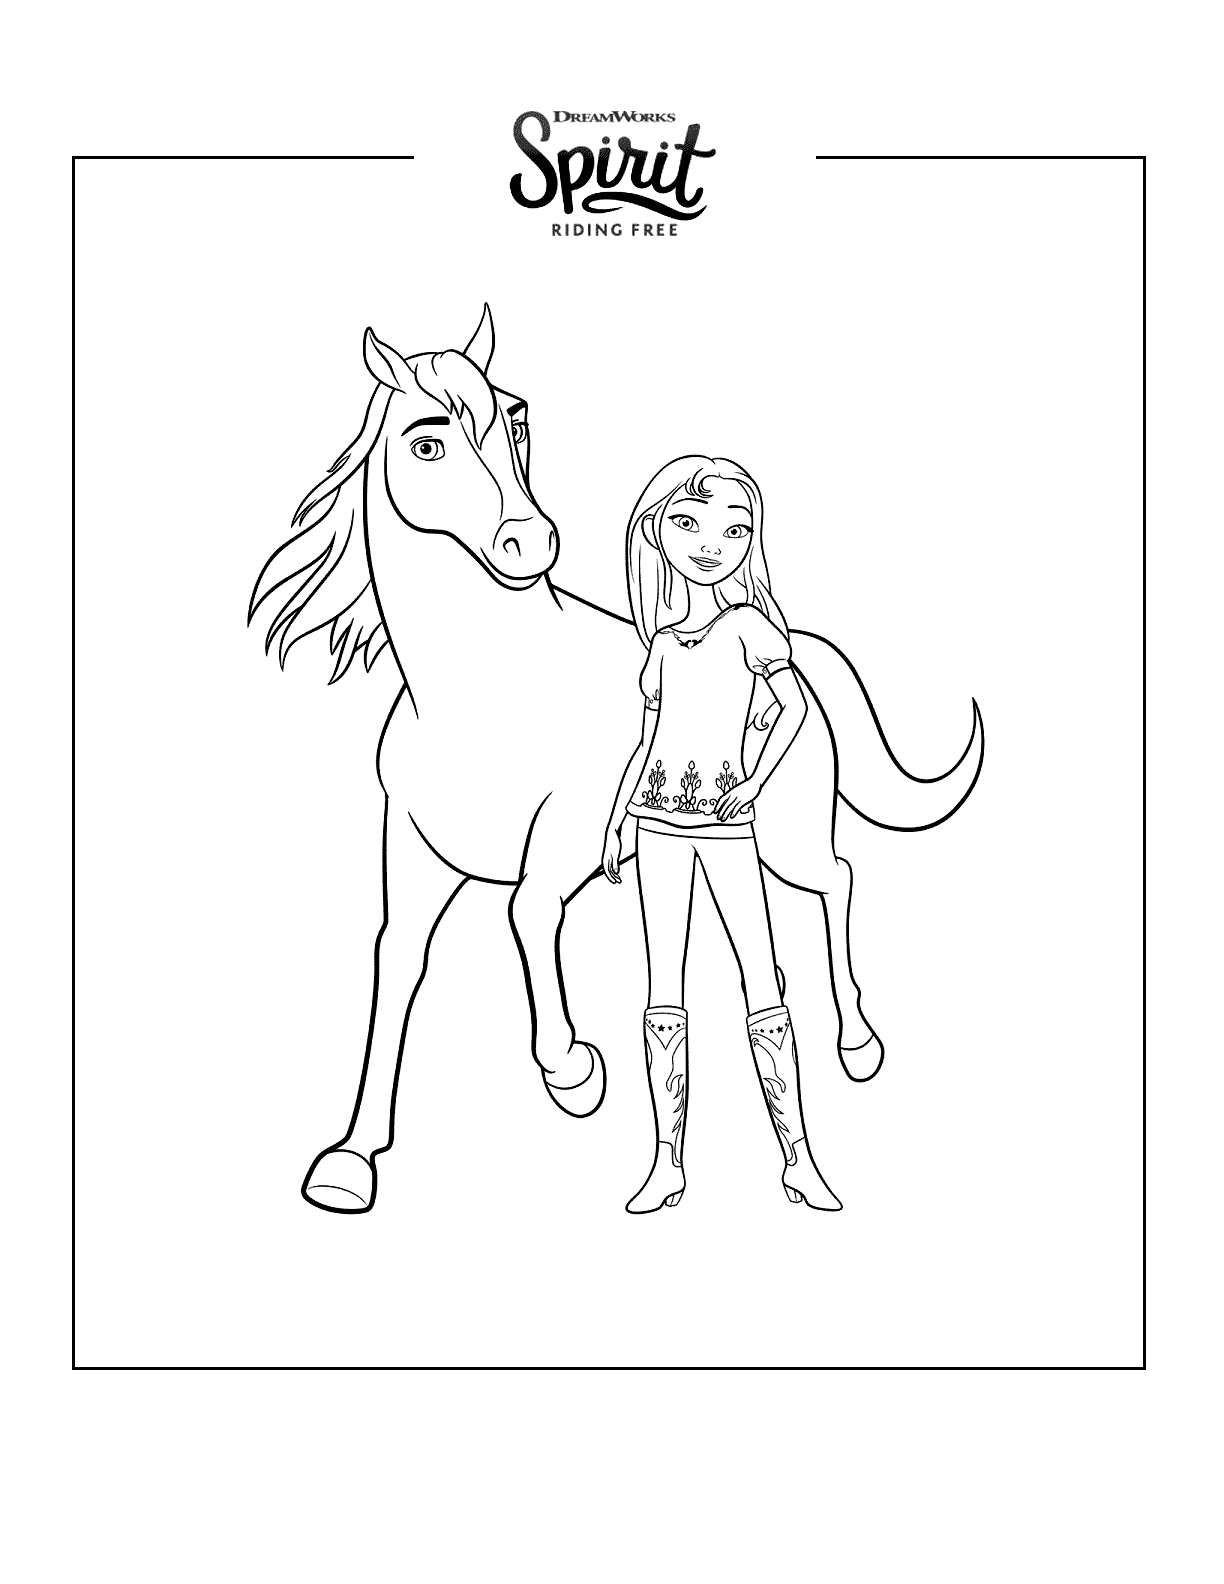 spirit horse coloring pages